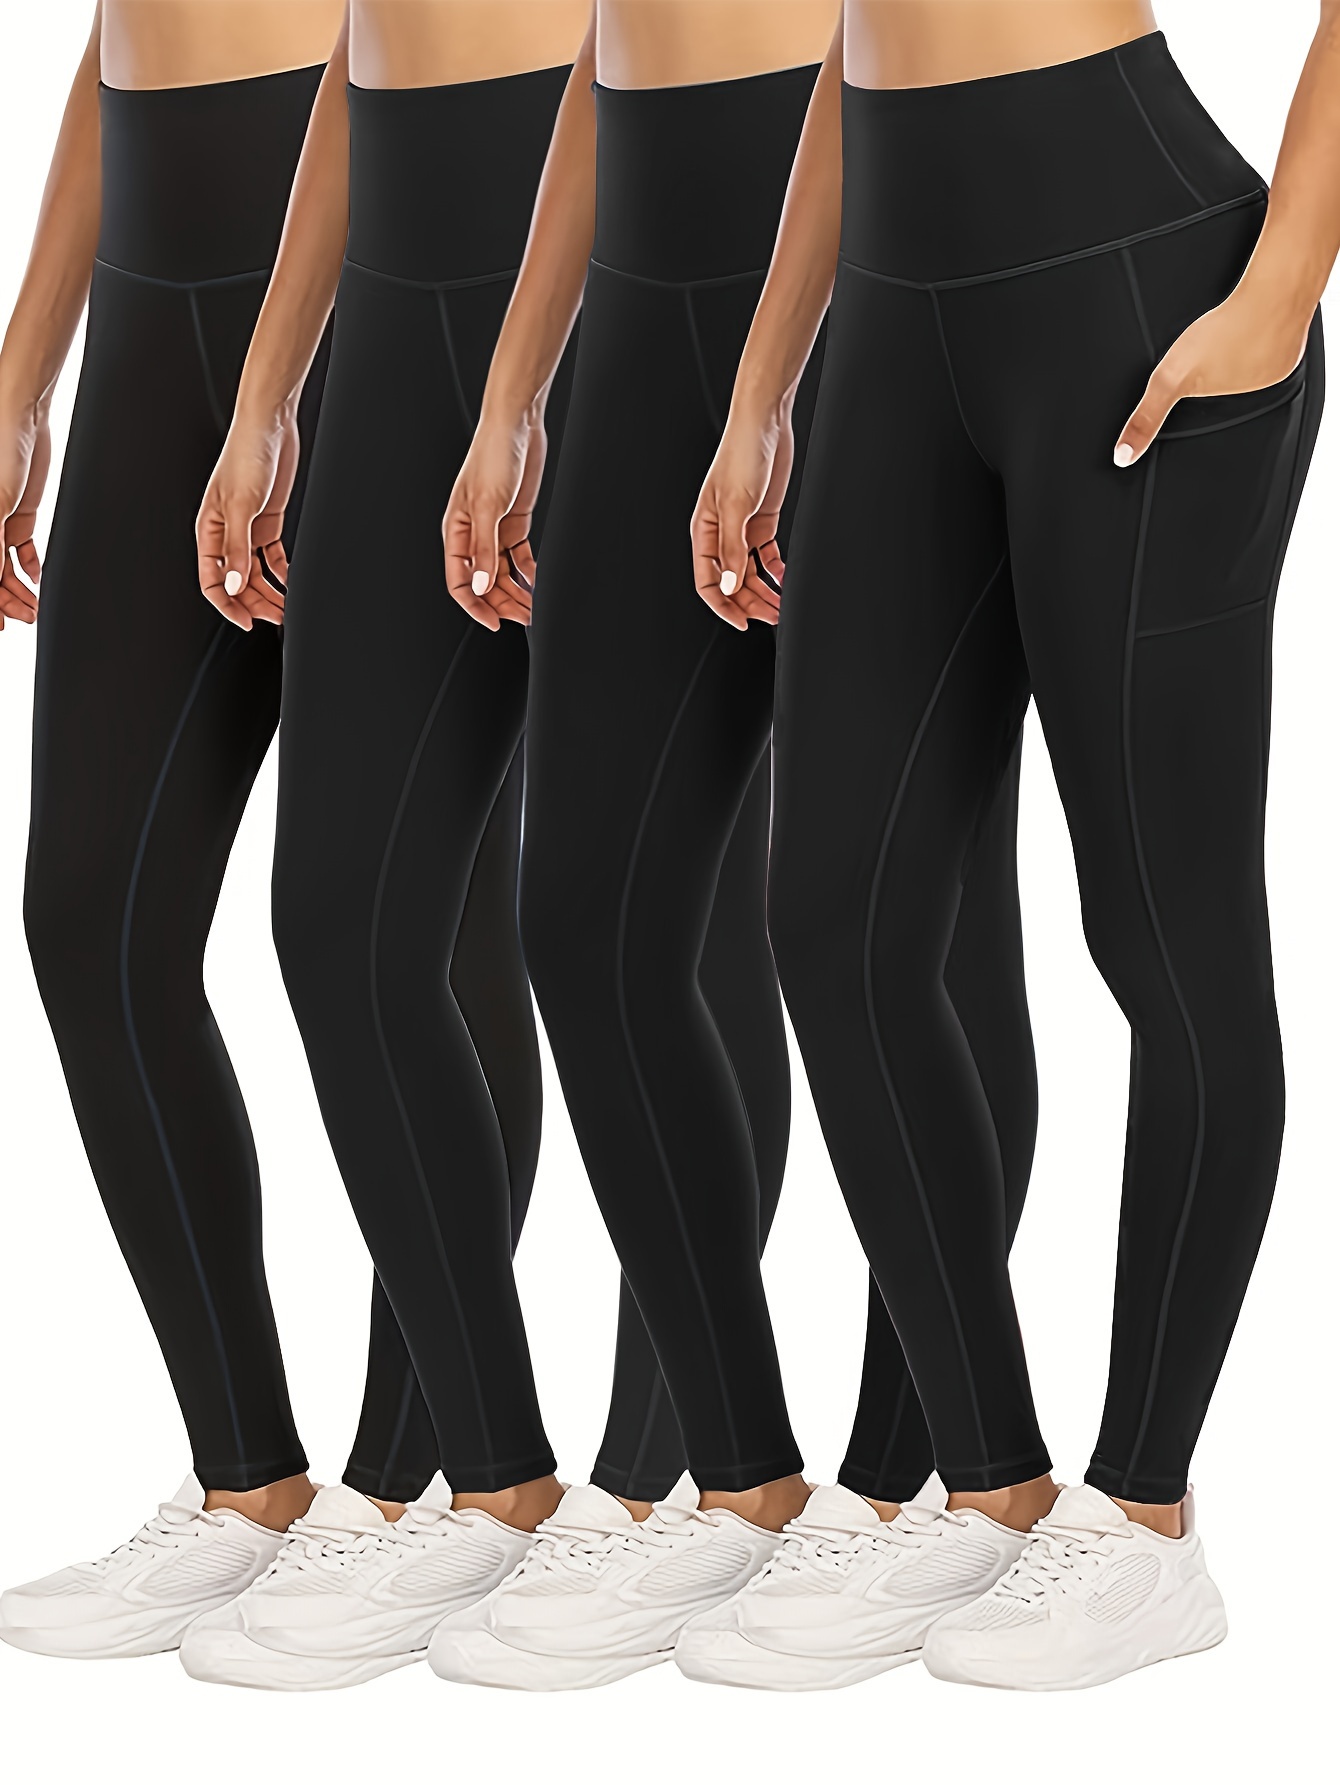 Boost Your Workout with Women's Tummy Control Sports Yoga Leggings - Phone  Pocket, Mesh Contrast & Breathable Tight-Fitting Pants!